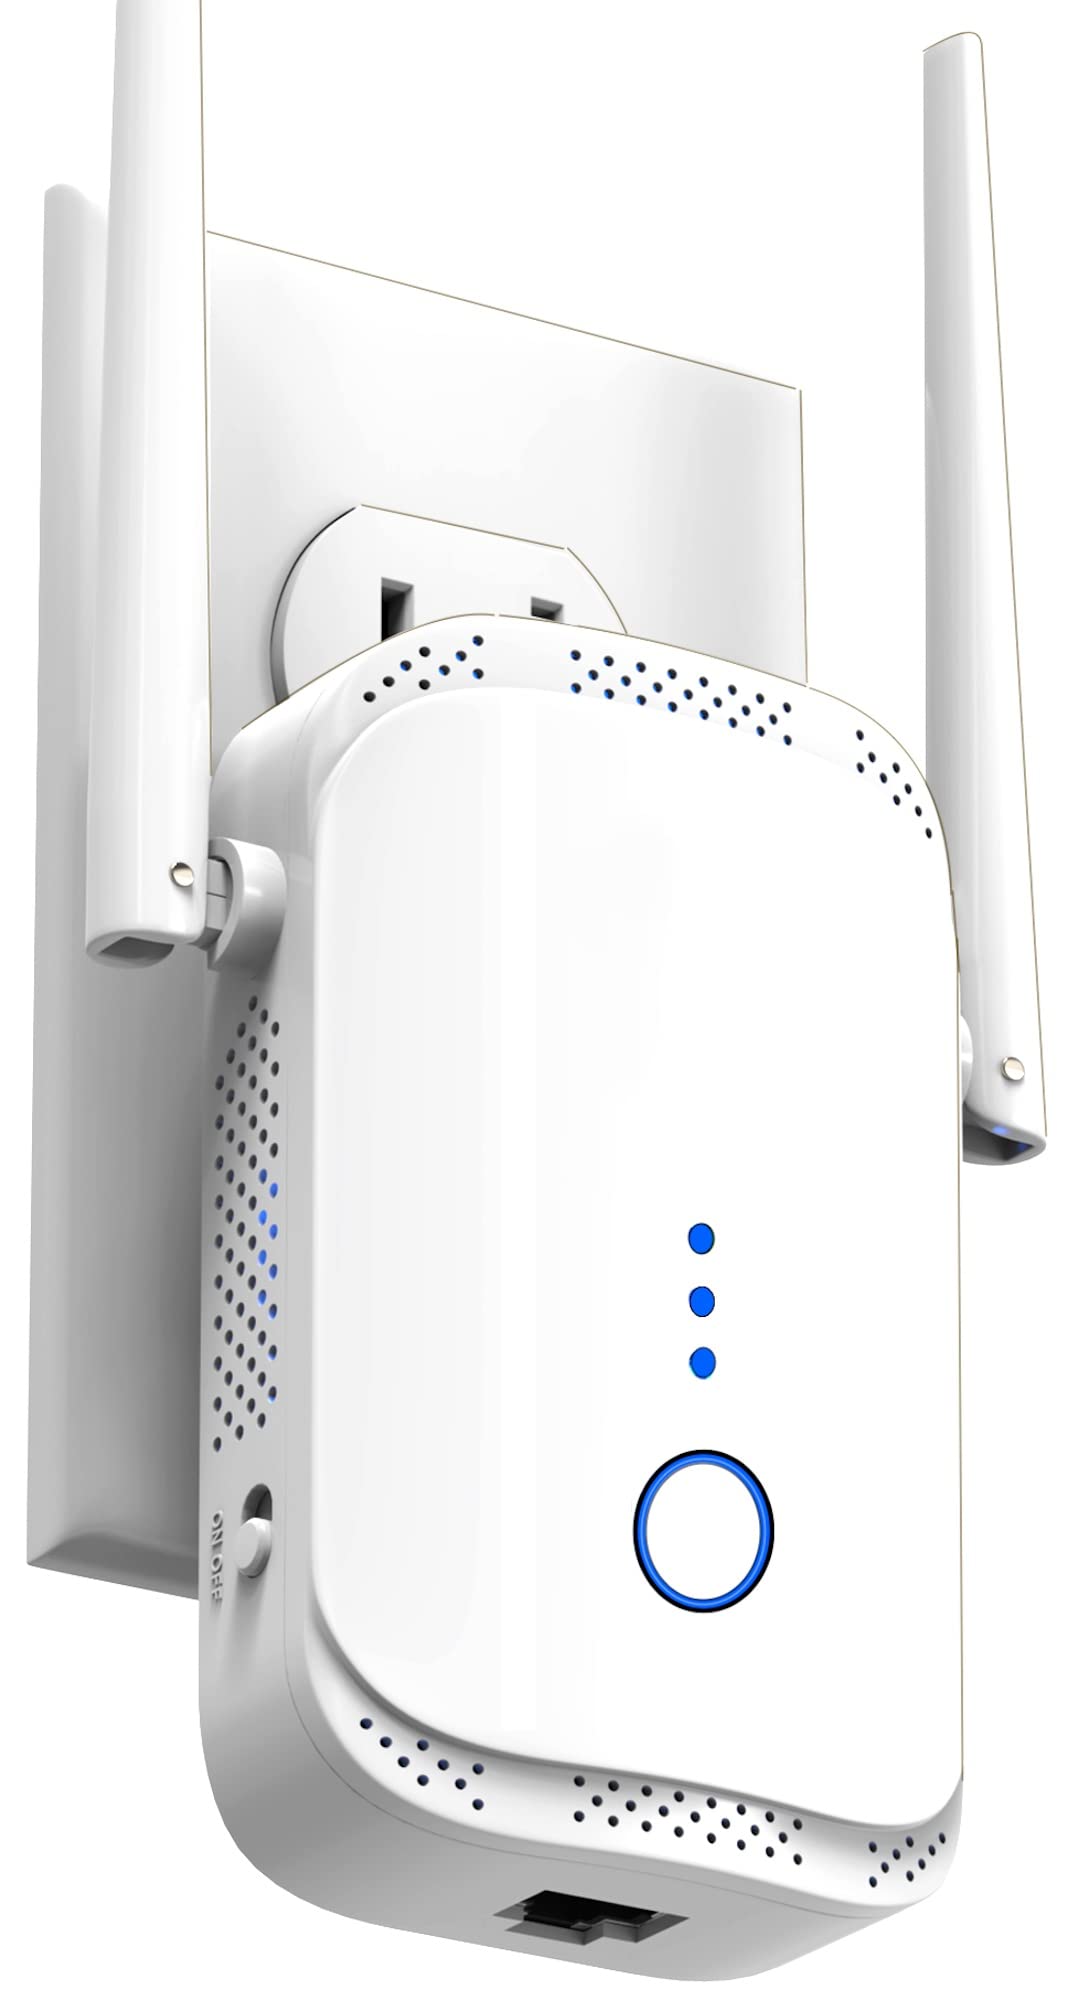 cryo360 macard 2022release WiFi Extender Signal Booster - for Home covers Up to 8470 Sqft and 47 Devices, WiFi Booster with Ethernet Port, Easy